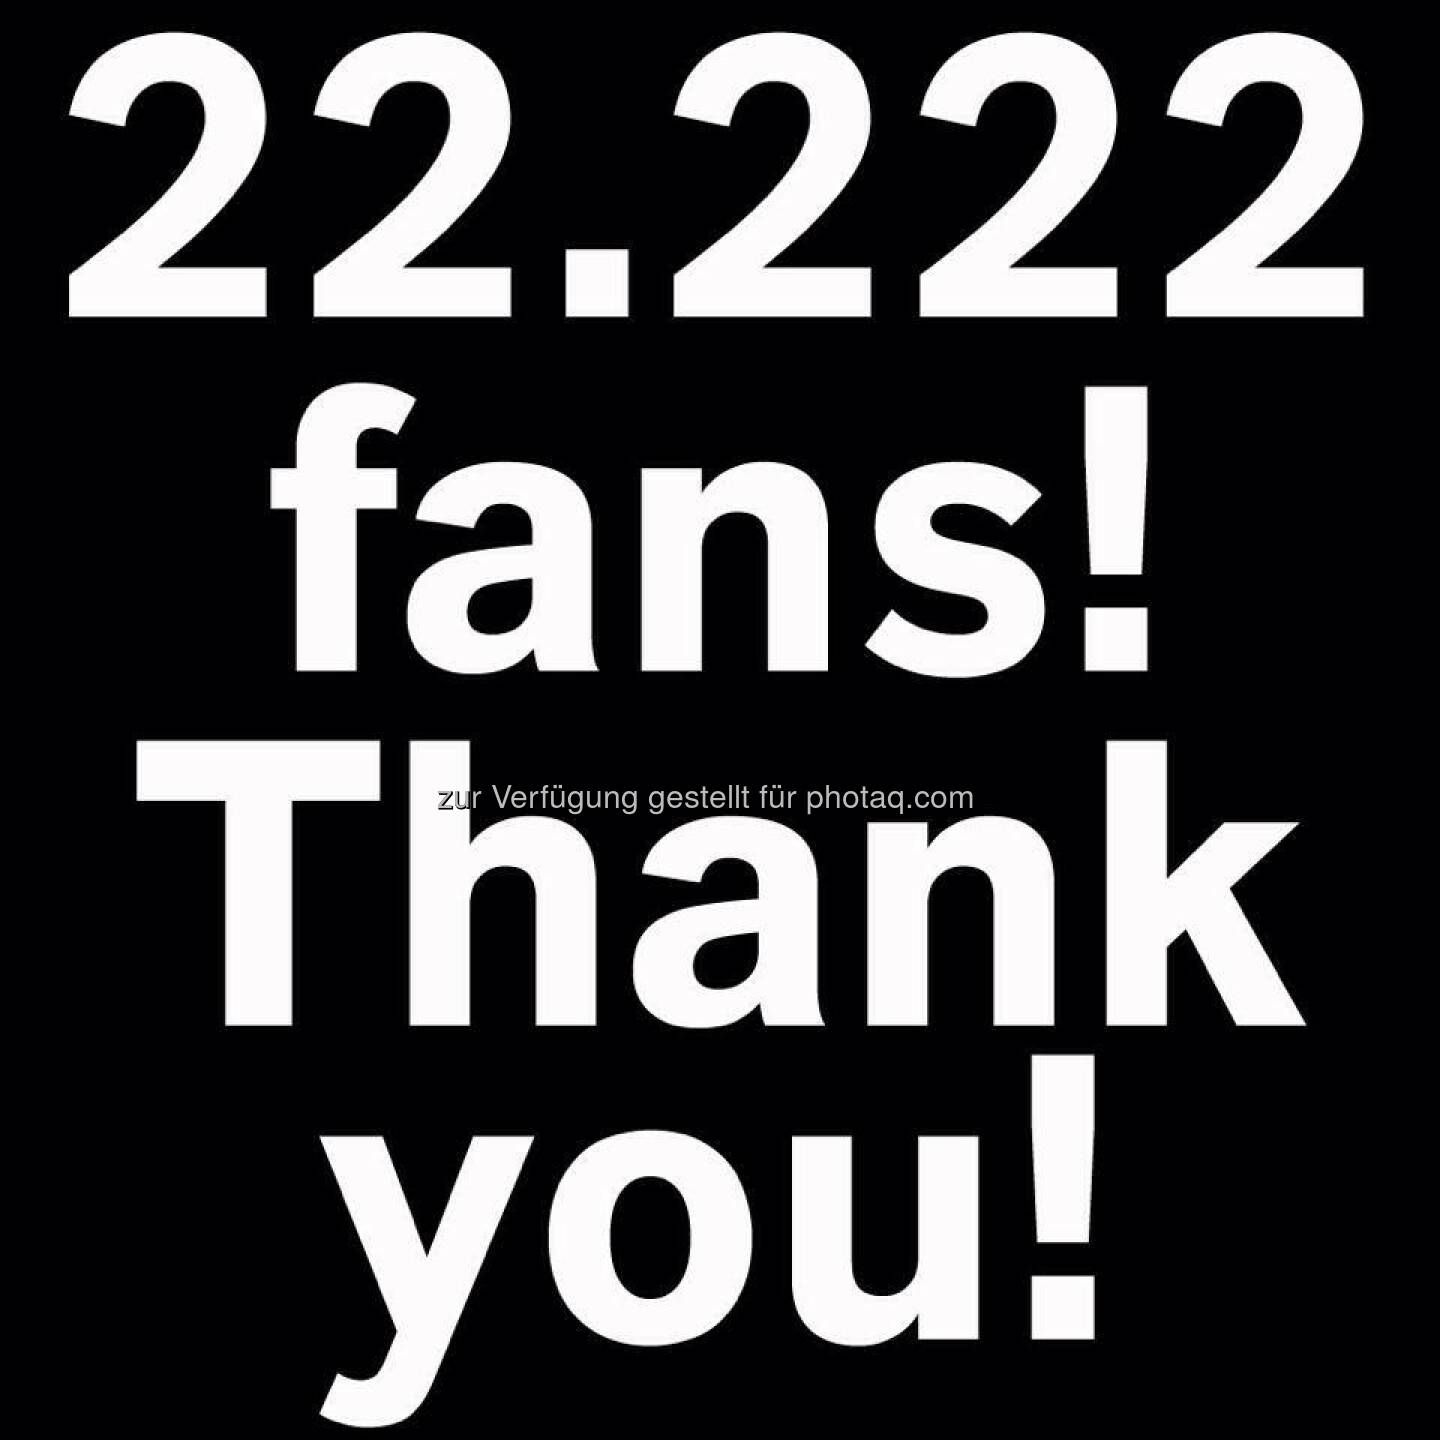 22.222 likes! Thanks for all your support and being a part of the #LANXESS community! Have a great day!  Source: http://facebook.com/LANXESS